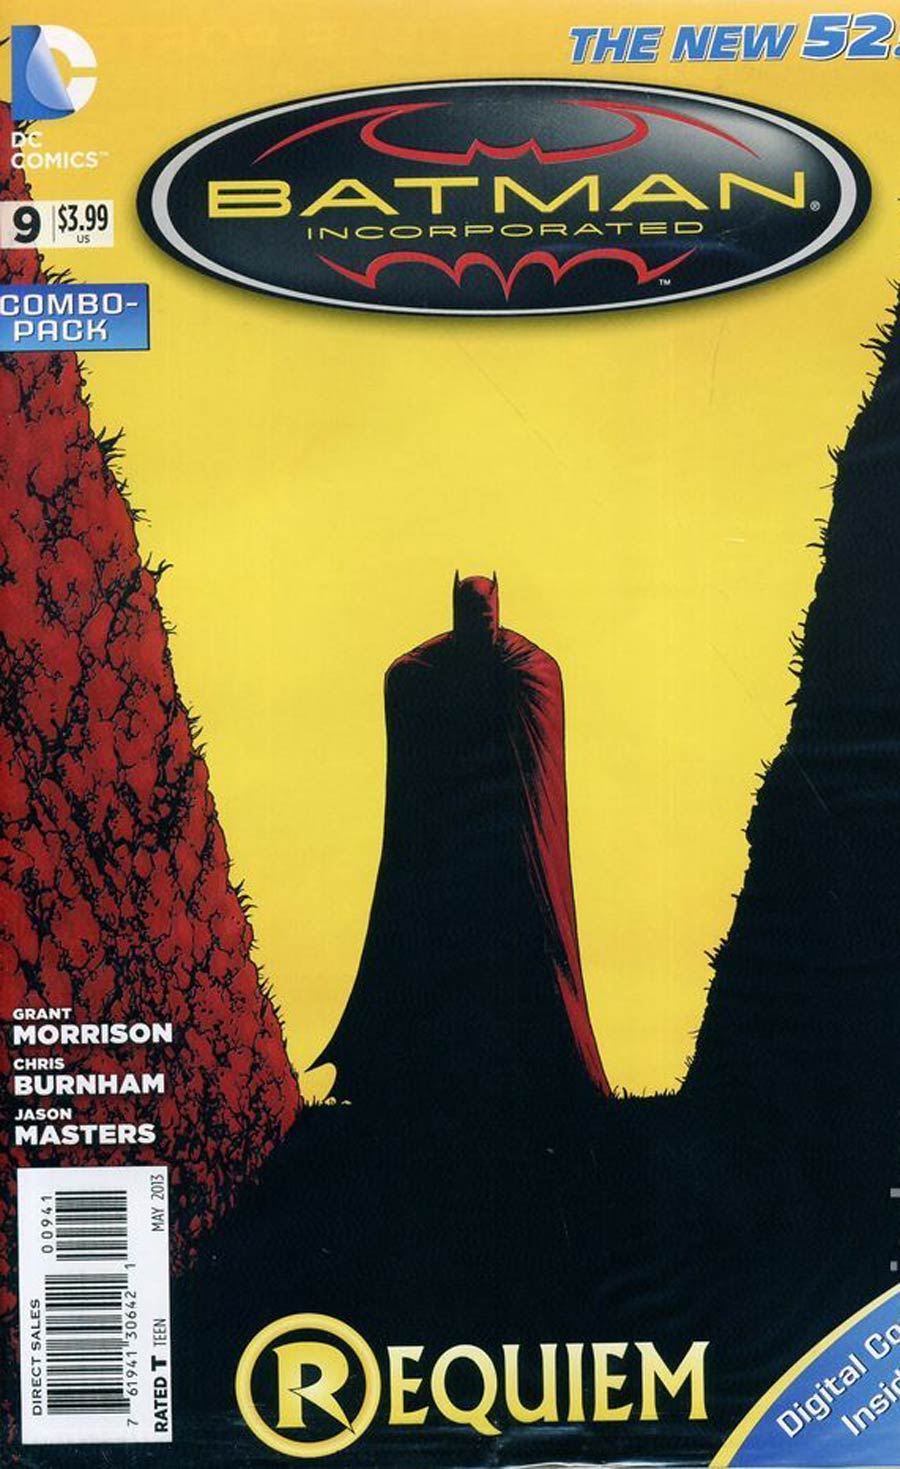 Batman Incorporated Vol 2 #9 Combo Pack With Polybag